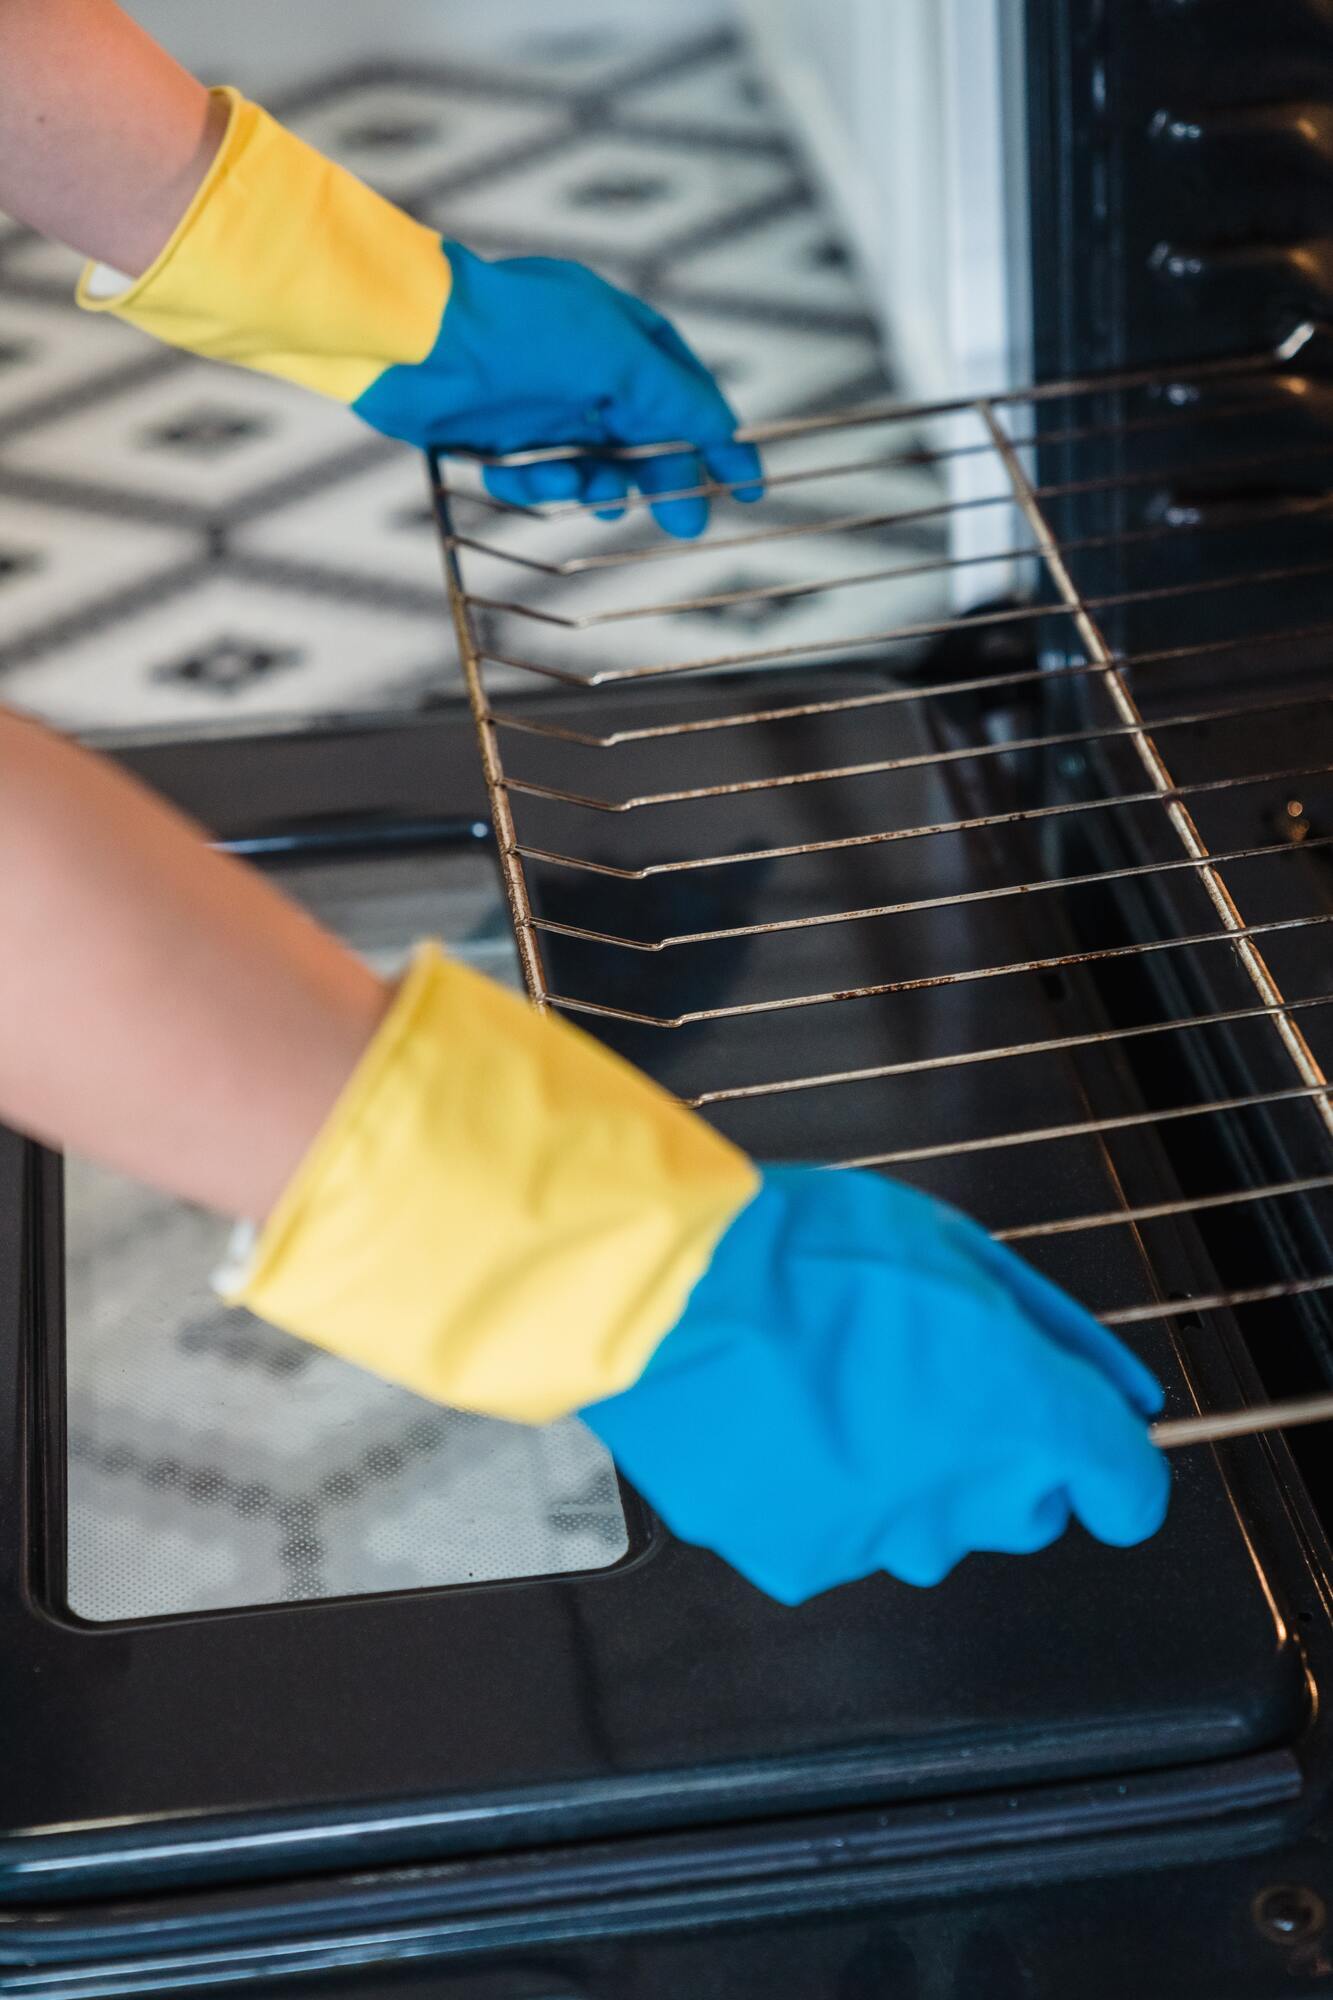 How to quickly clean an oven